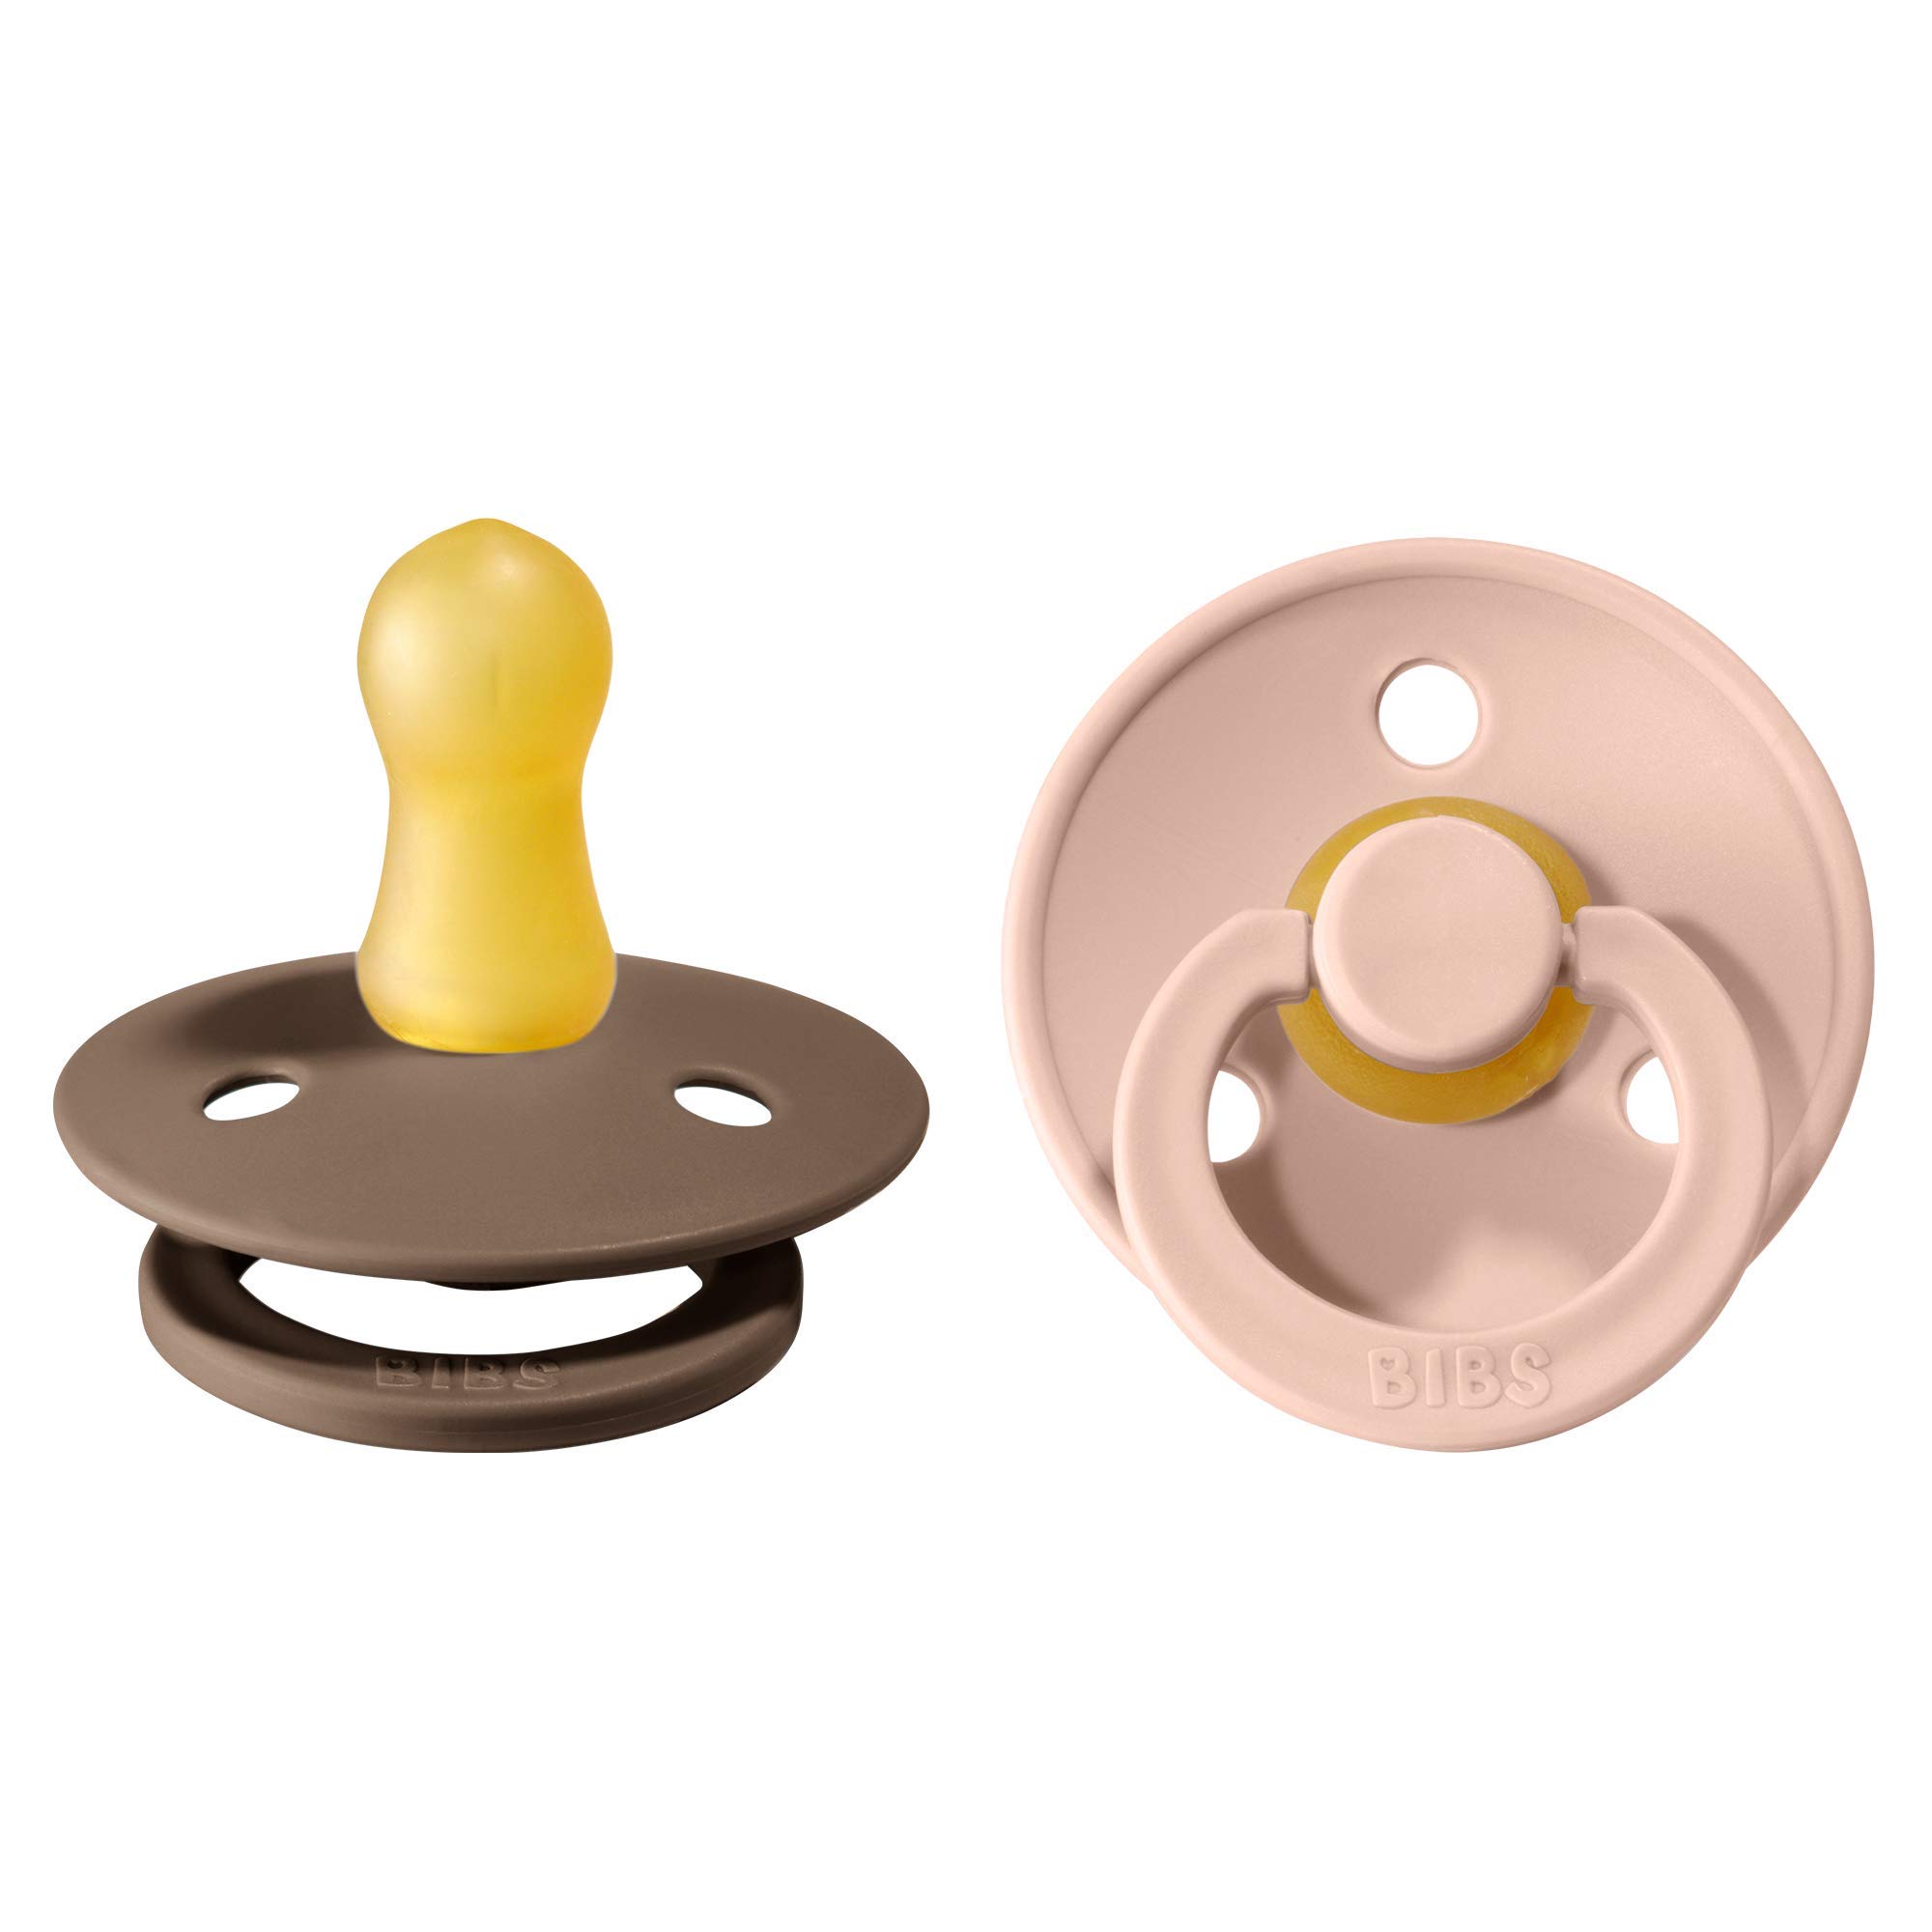 BIBS Pacifiers  Natural Rubber Baby Pacifier  Set of 2 BPA-Free Soothers  Made in Denmark  BlushDark Oak  Size 0-6 Months